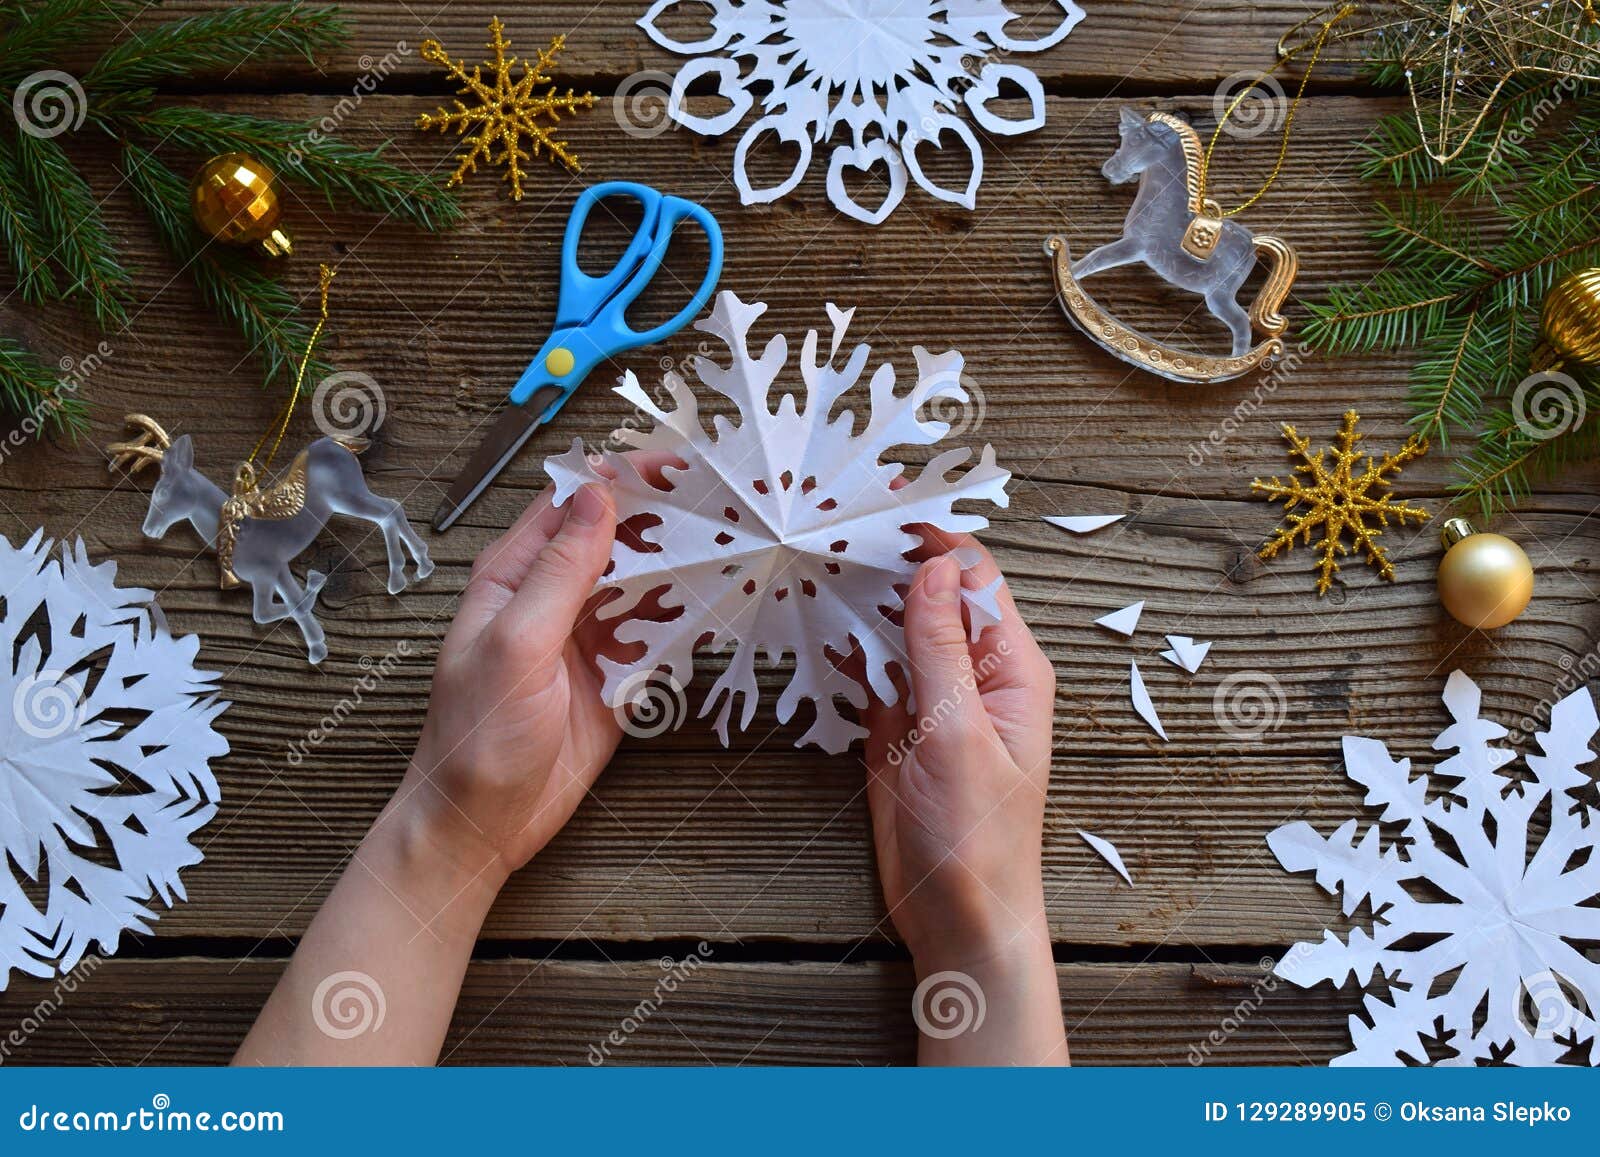 How to make a paper snowflake Christmas ornament